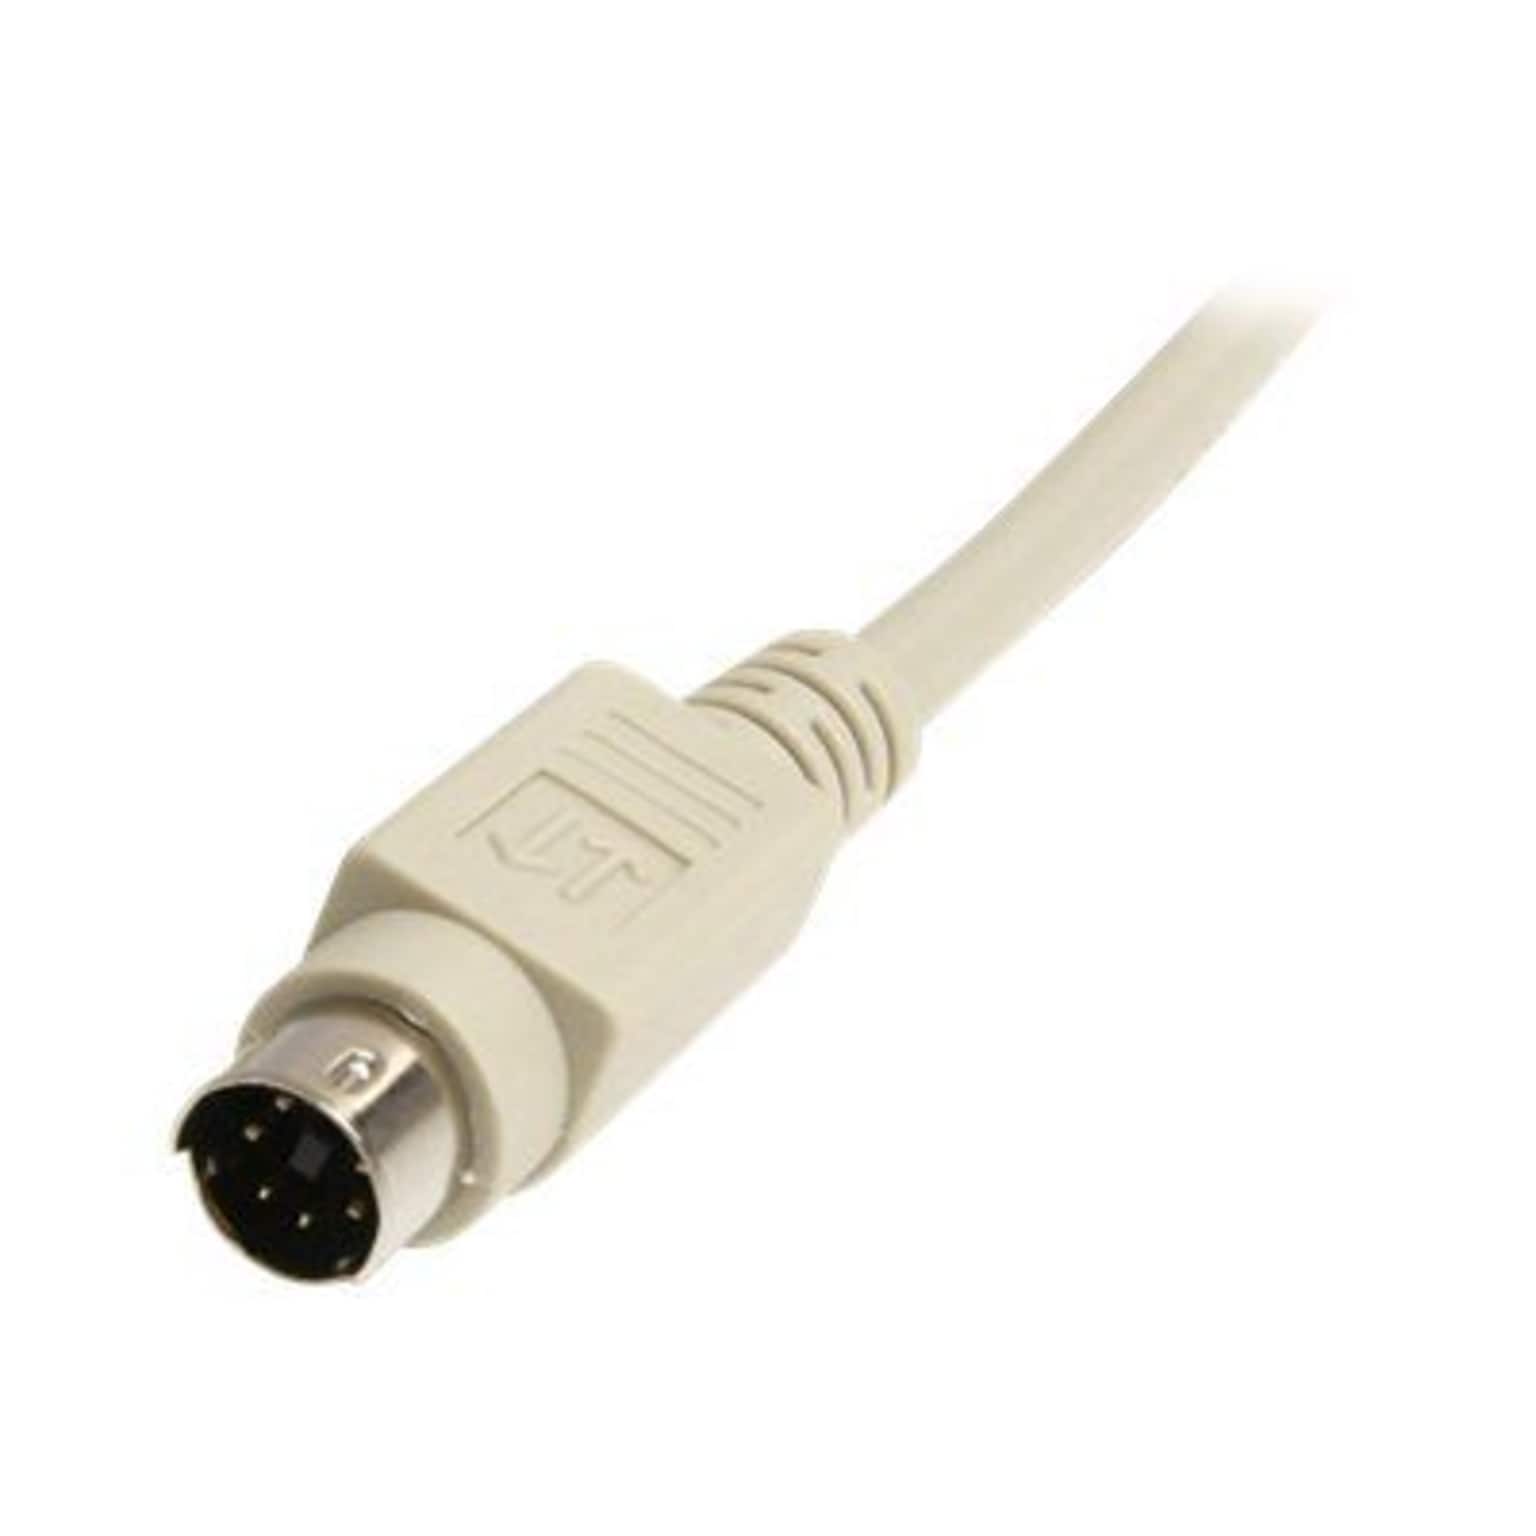 StarTech 6 PS/2 Male to Female Keyboard/Mouse Extension Cable, Beige (KXT102)